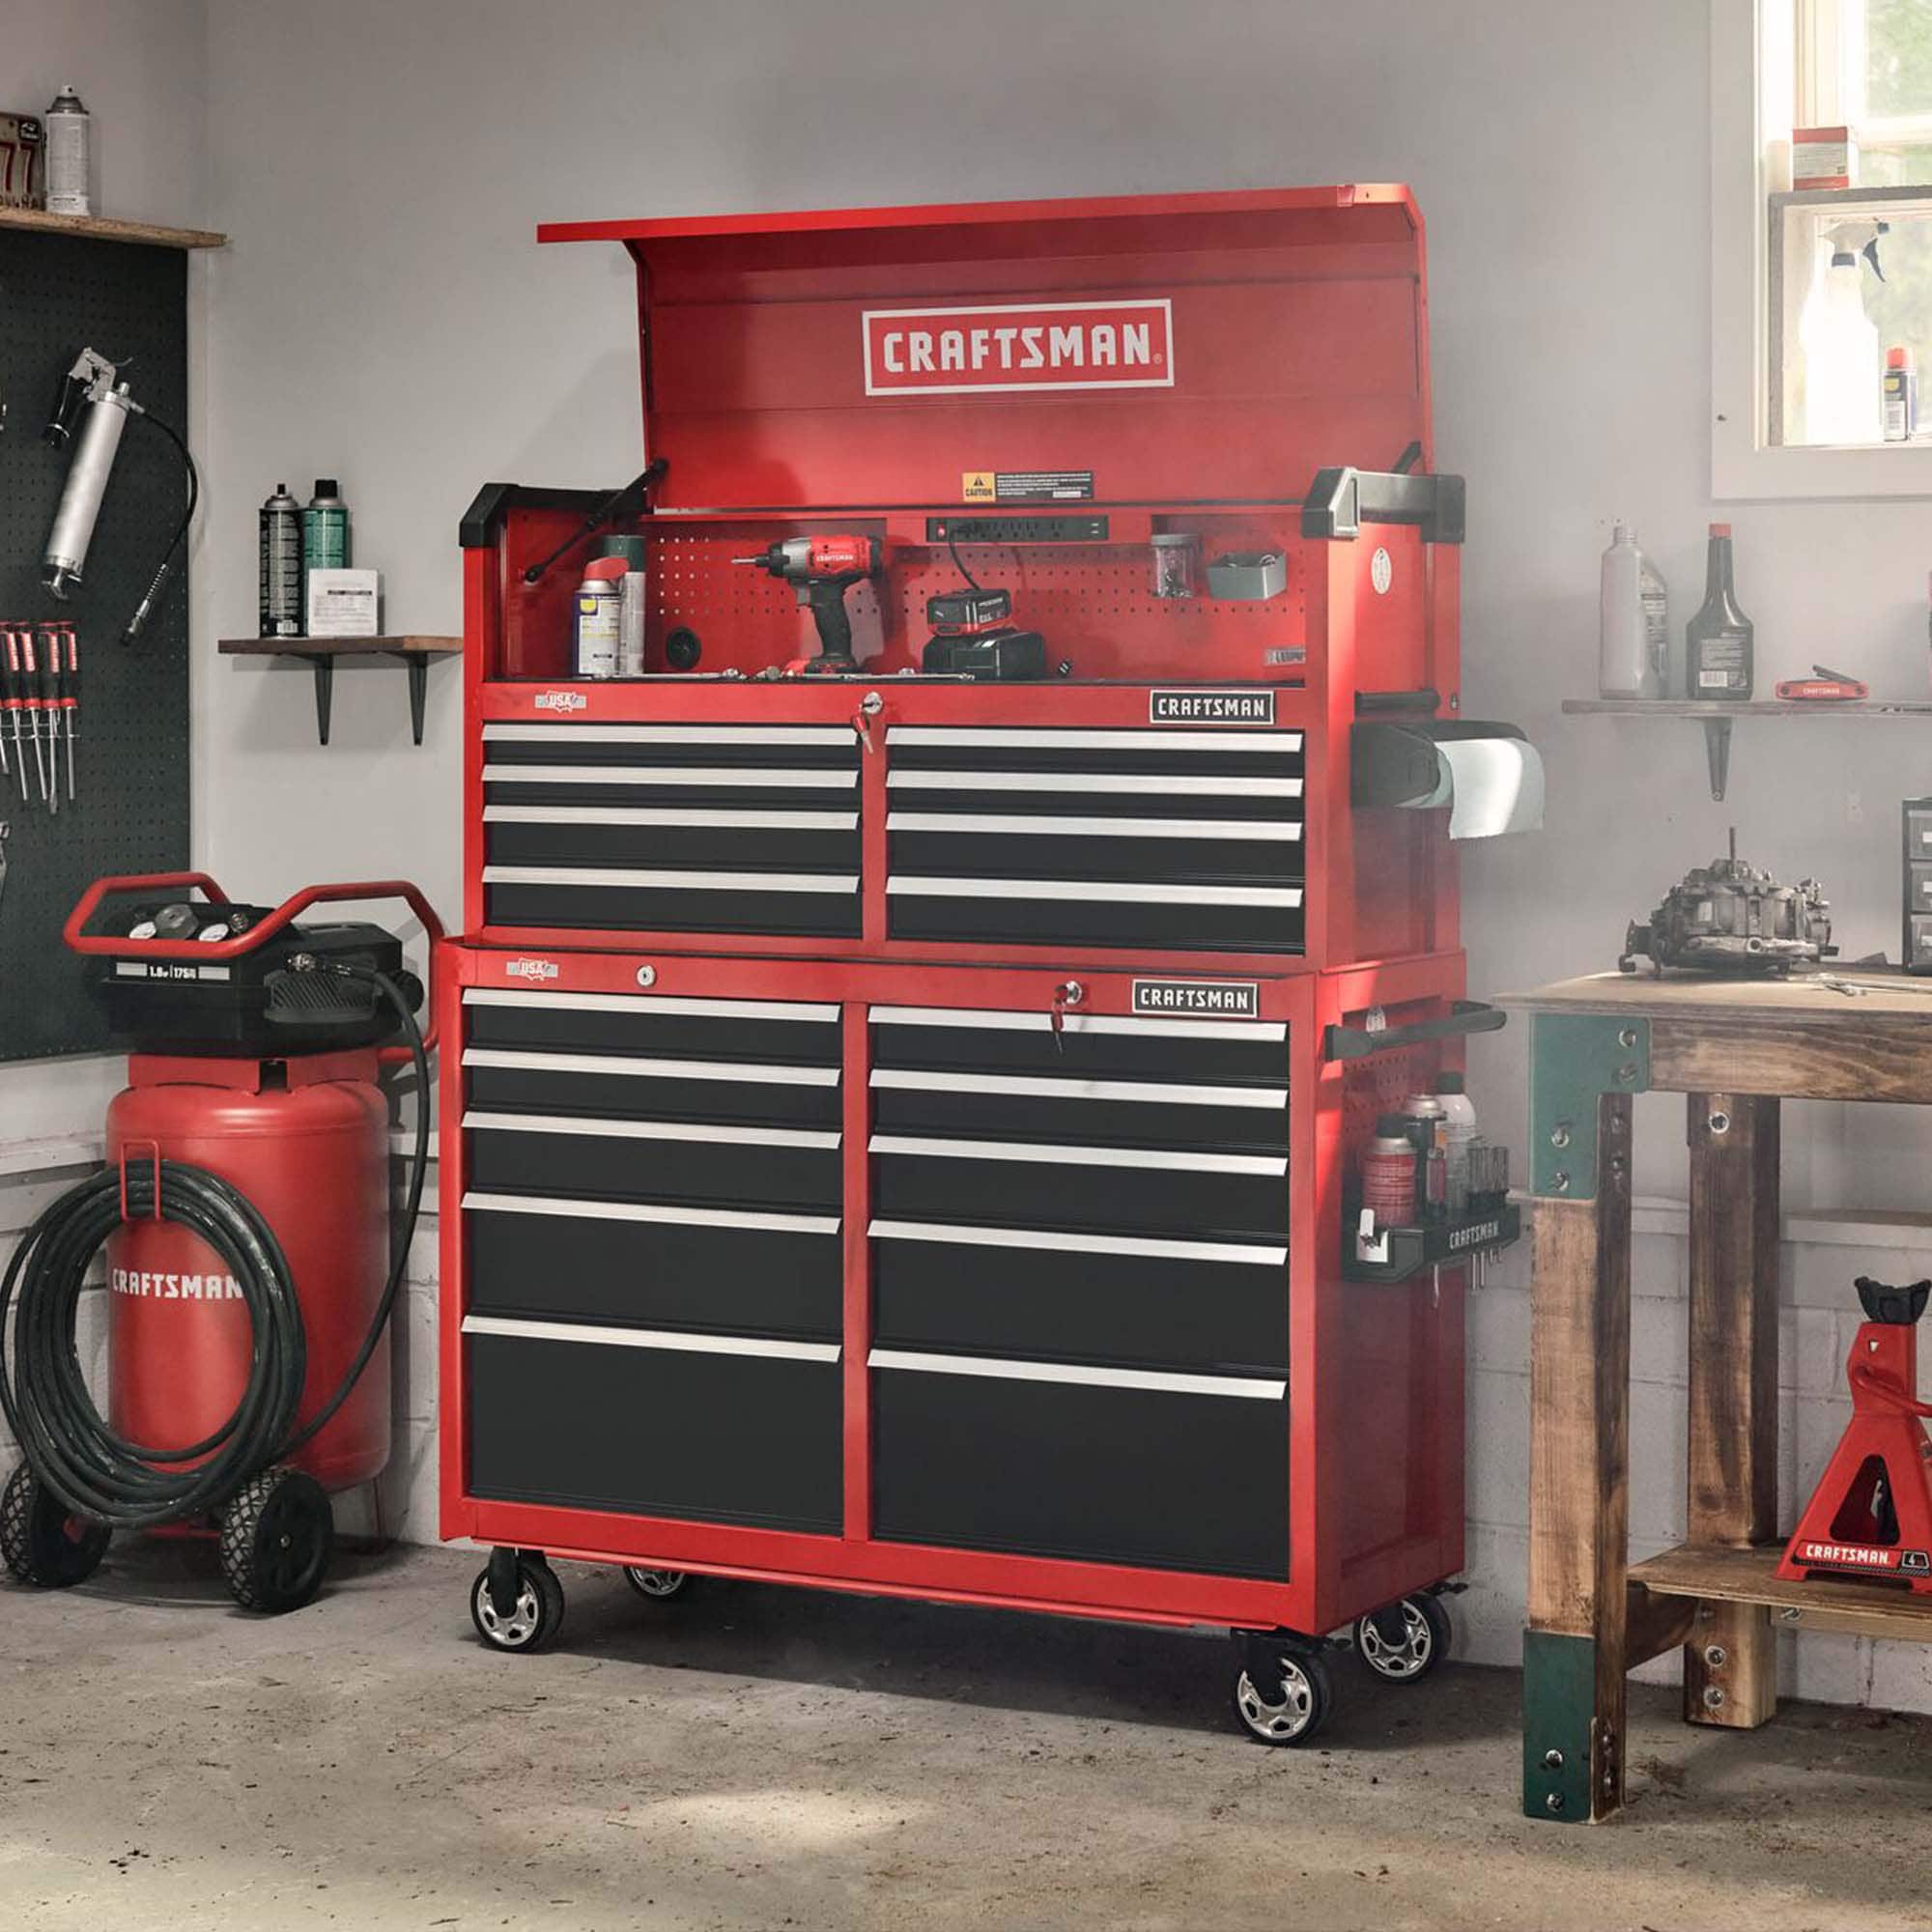 Craftsman S2000 52 In Red Tool Storage Collection Ubicaciondepersonas